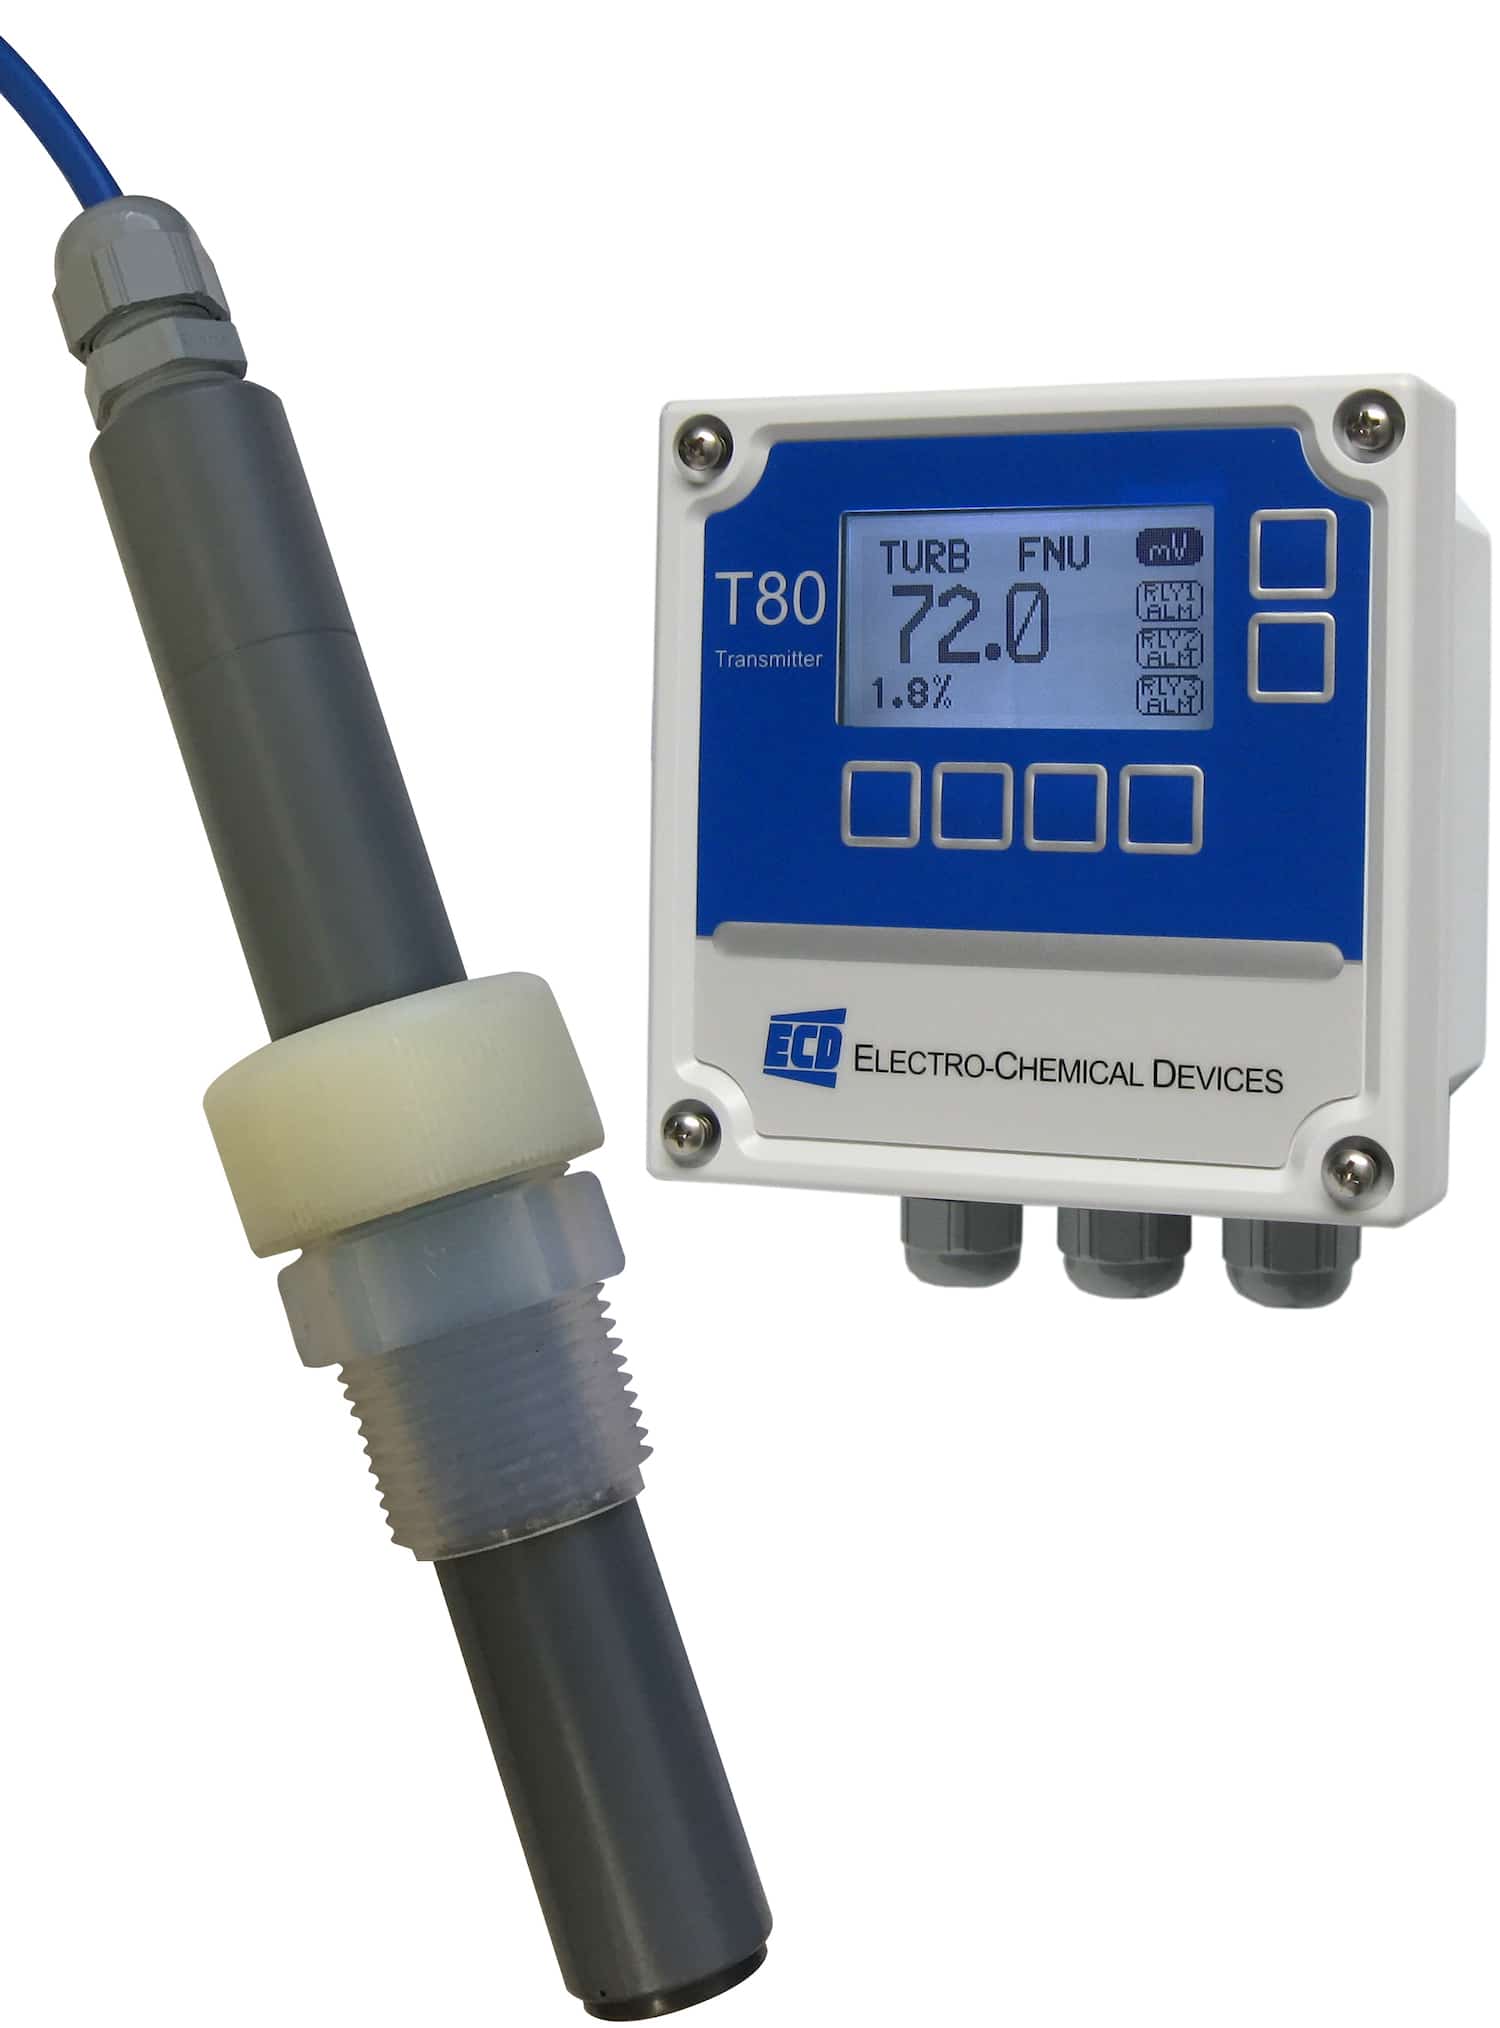 Dual Function TR82 Analyzer Detects and Measures Turbidity in Either Clear Water or Wastewater